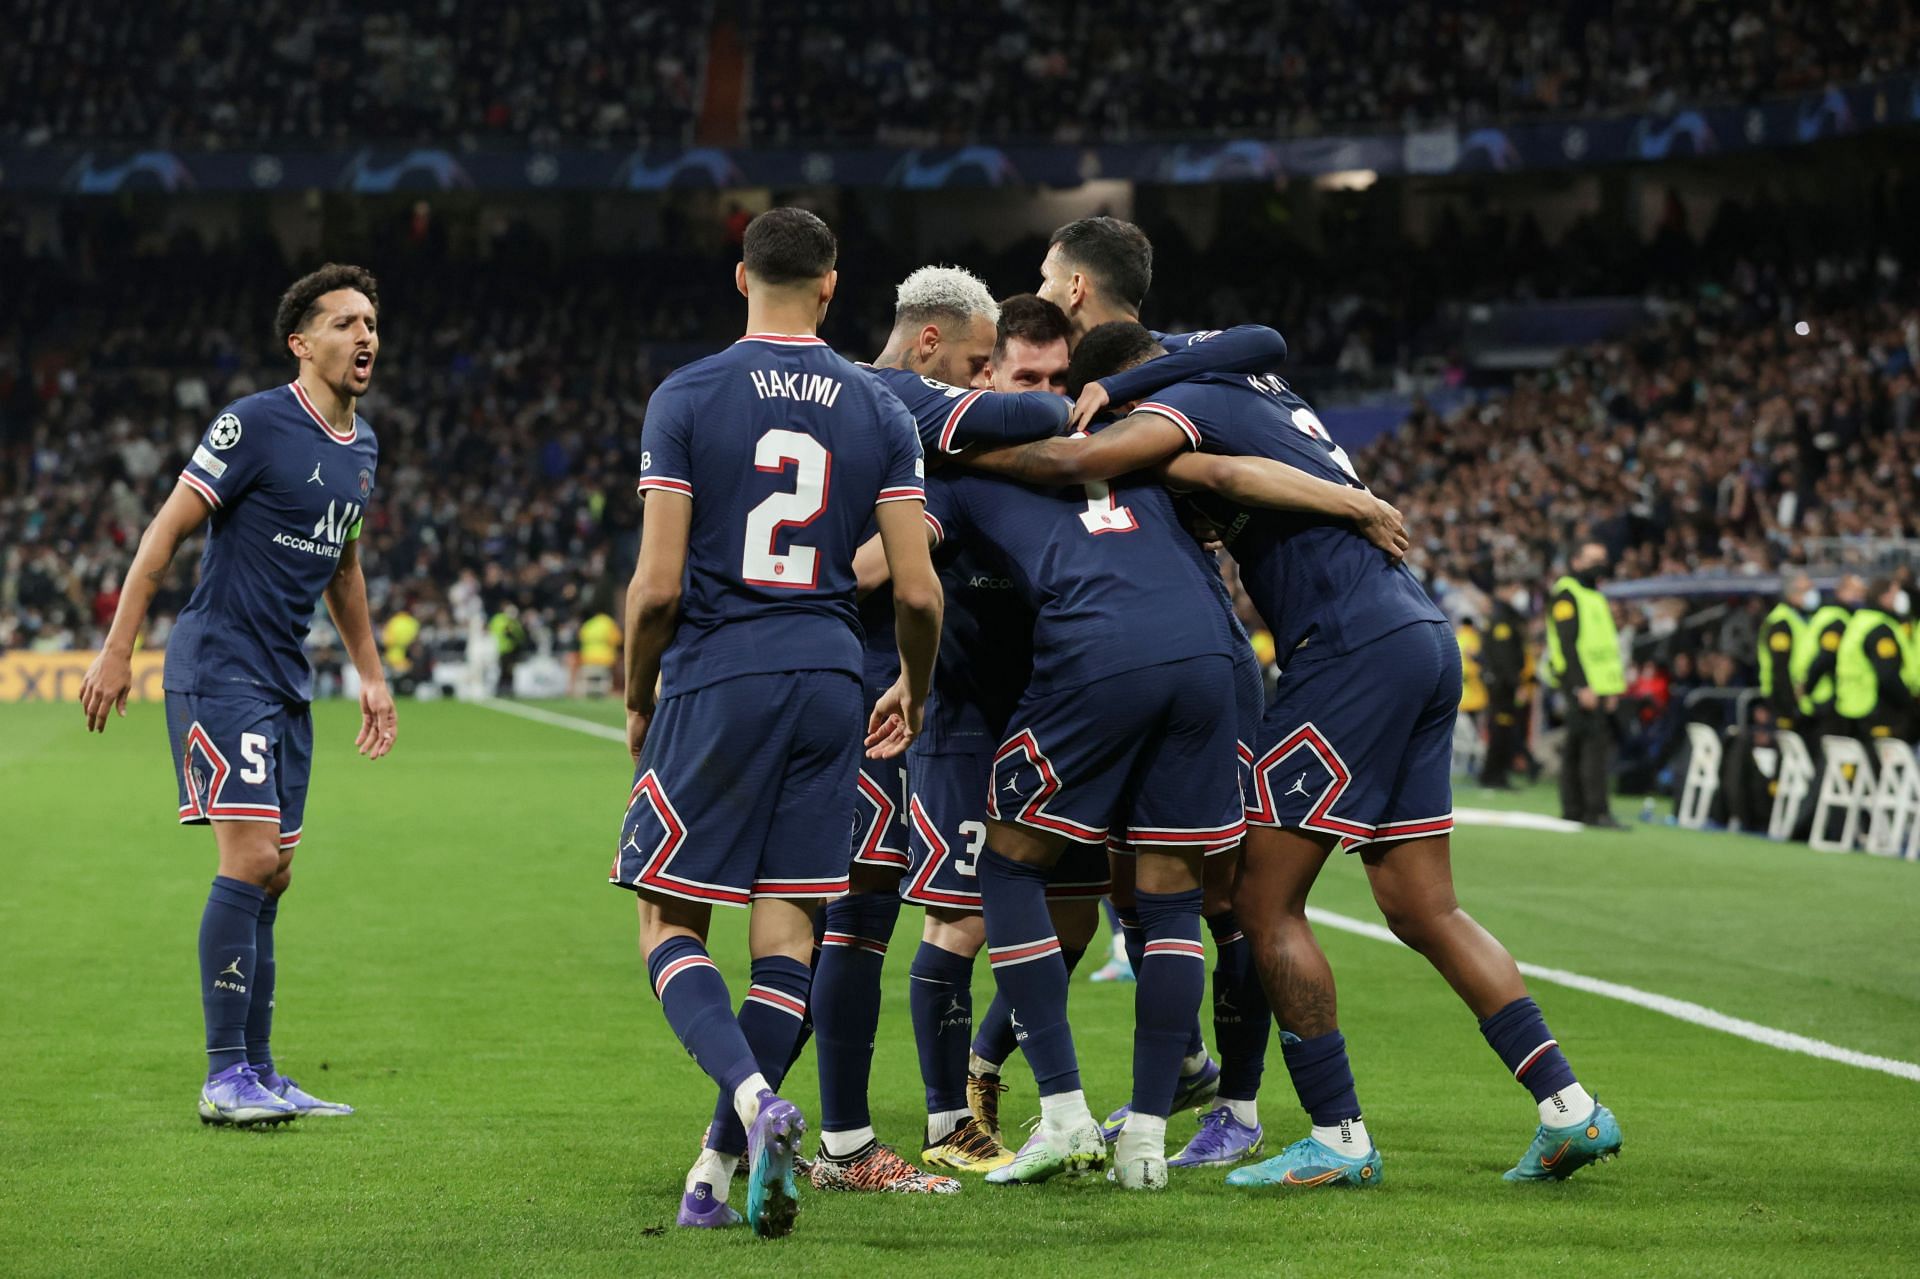 PSG take on Montpellier in Ligue 1 this weekend